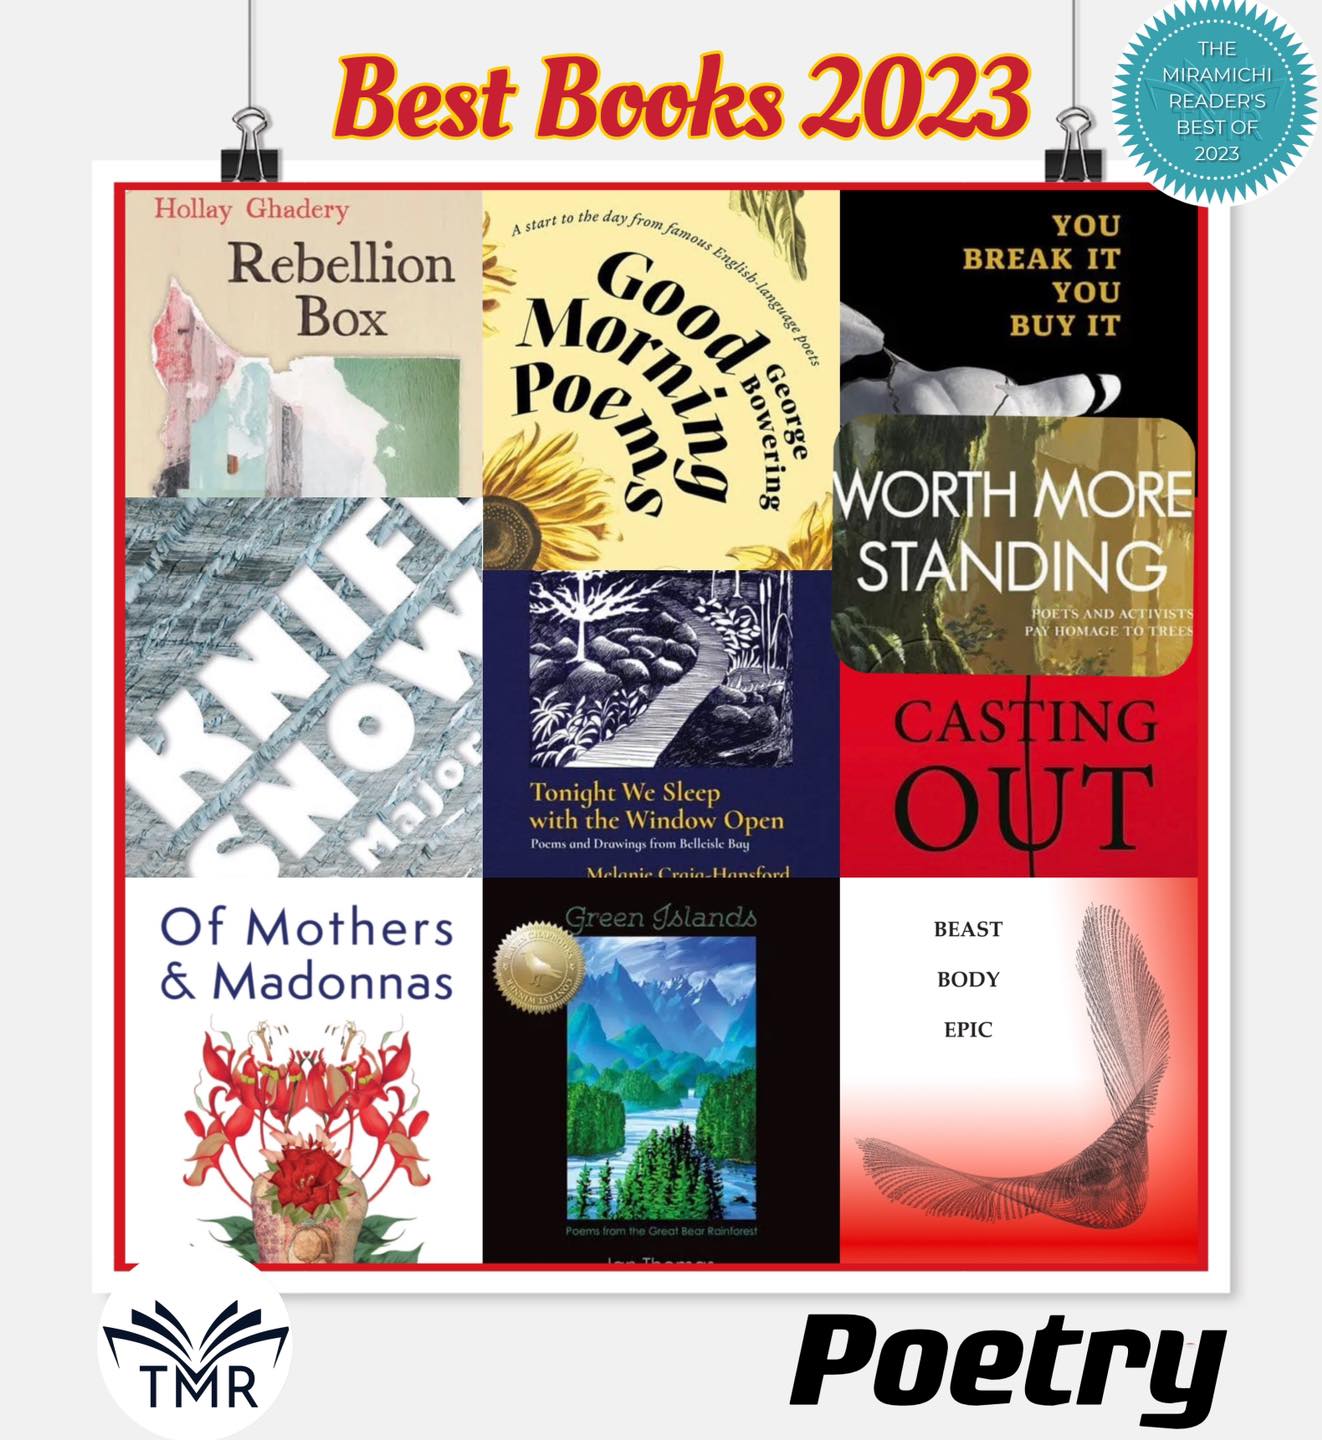 10 Poets listed as Best Books of 2023 by Miramichi Reader